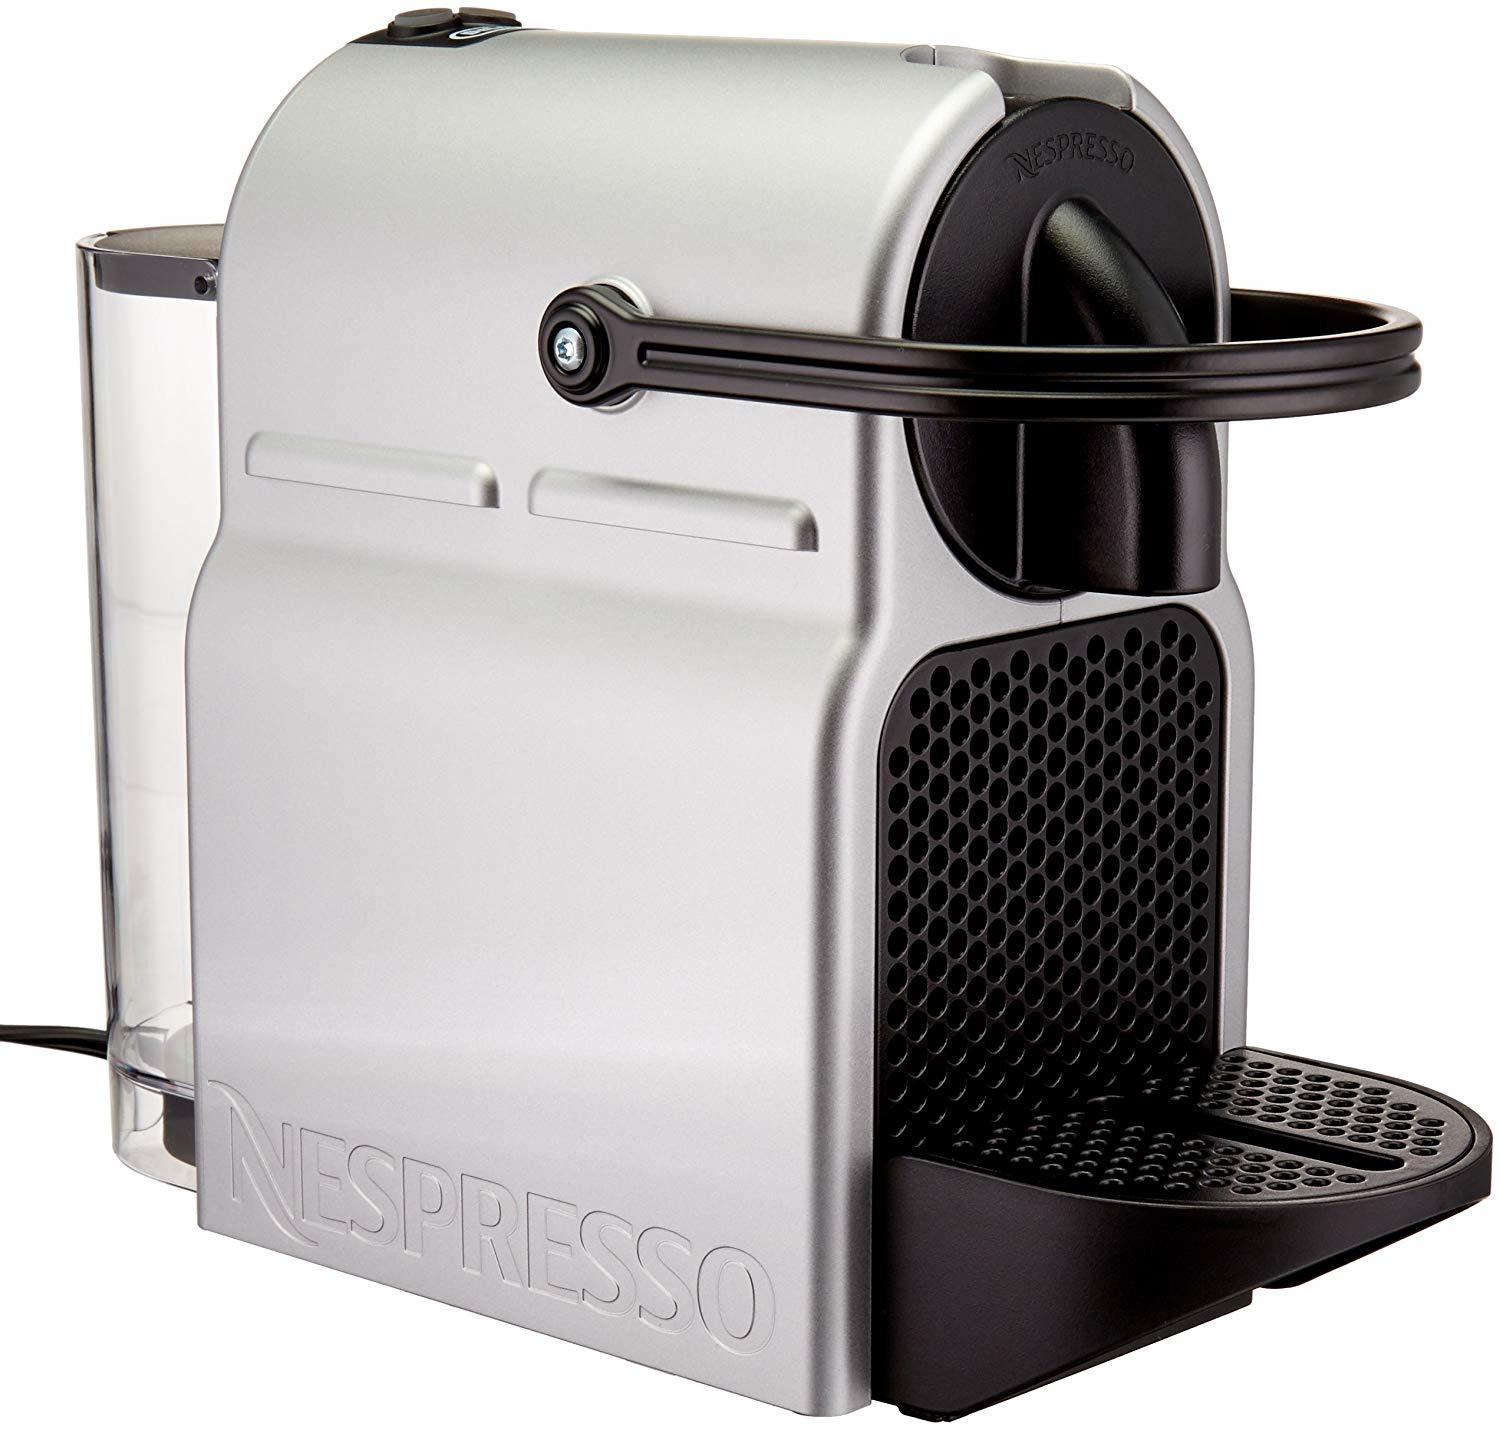 Nespresso Inissia Espresso Machine By De’Longhi For Just $59.99 Shipped From Amazon After $40-$89 Cyber Monday Savings!